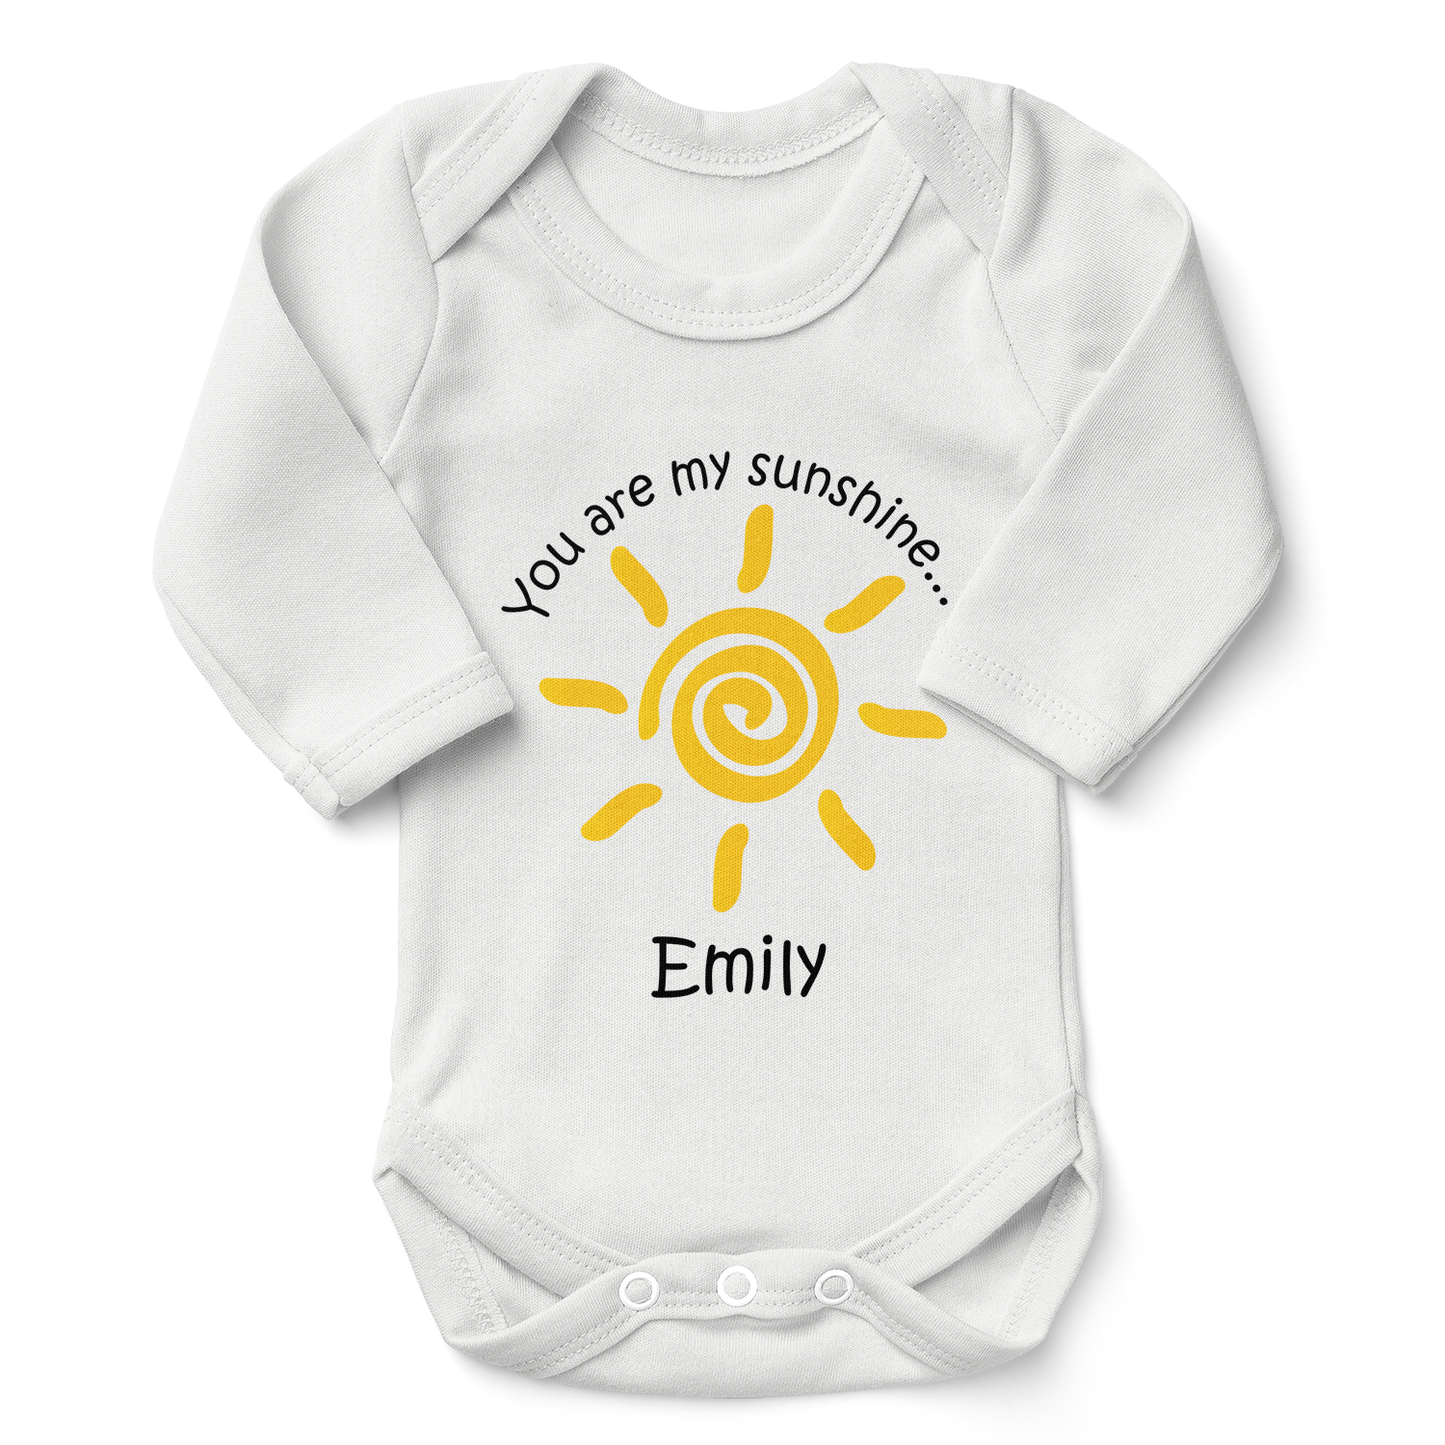 Personalized Organic Baby Bodysuit - You Are My Sunshine (White)